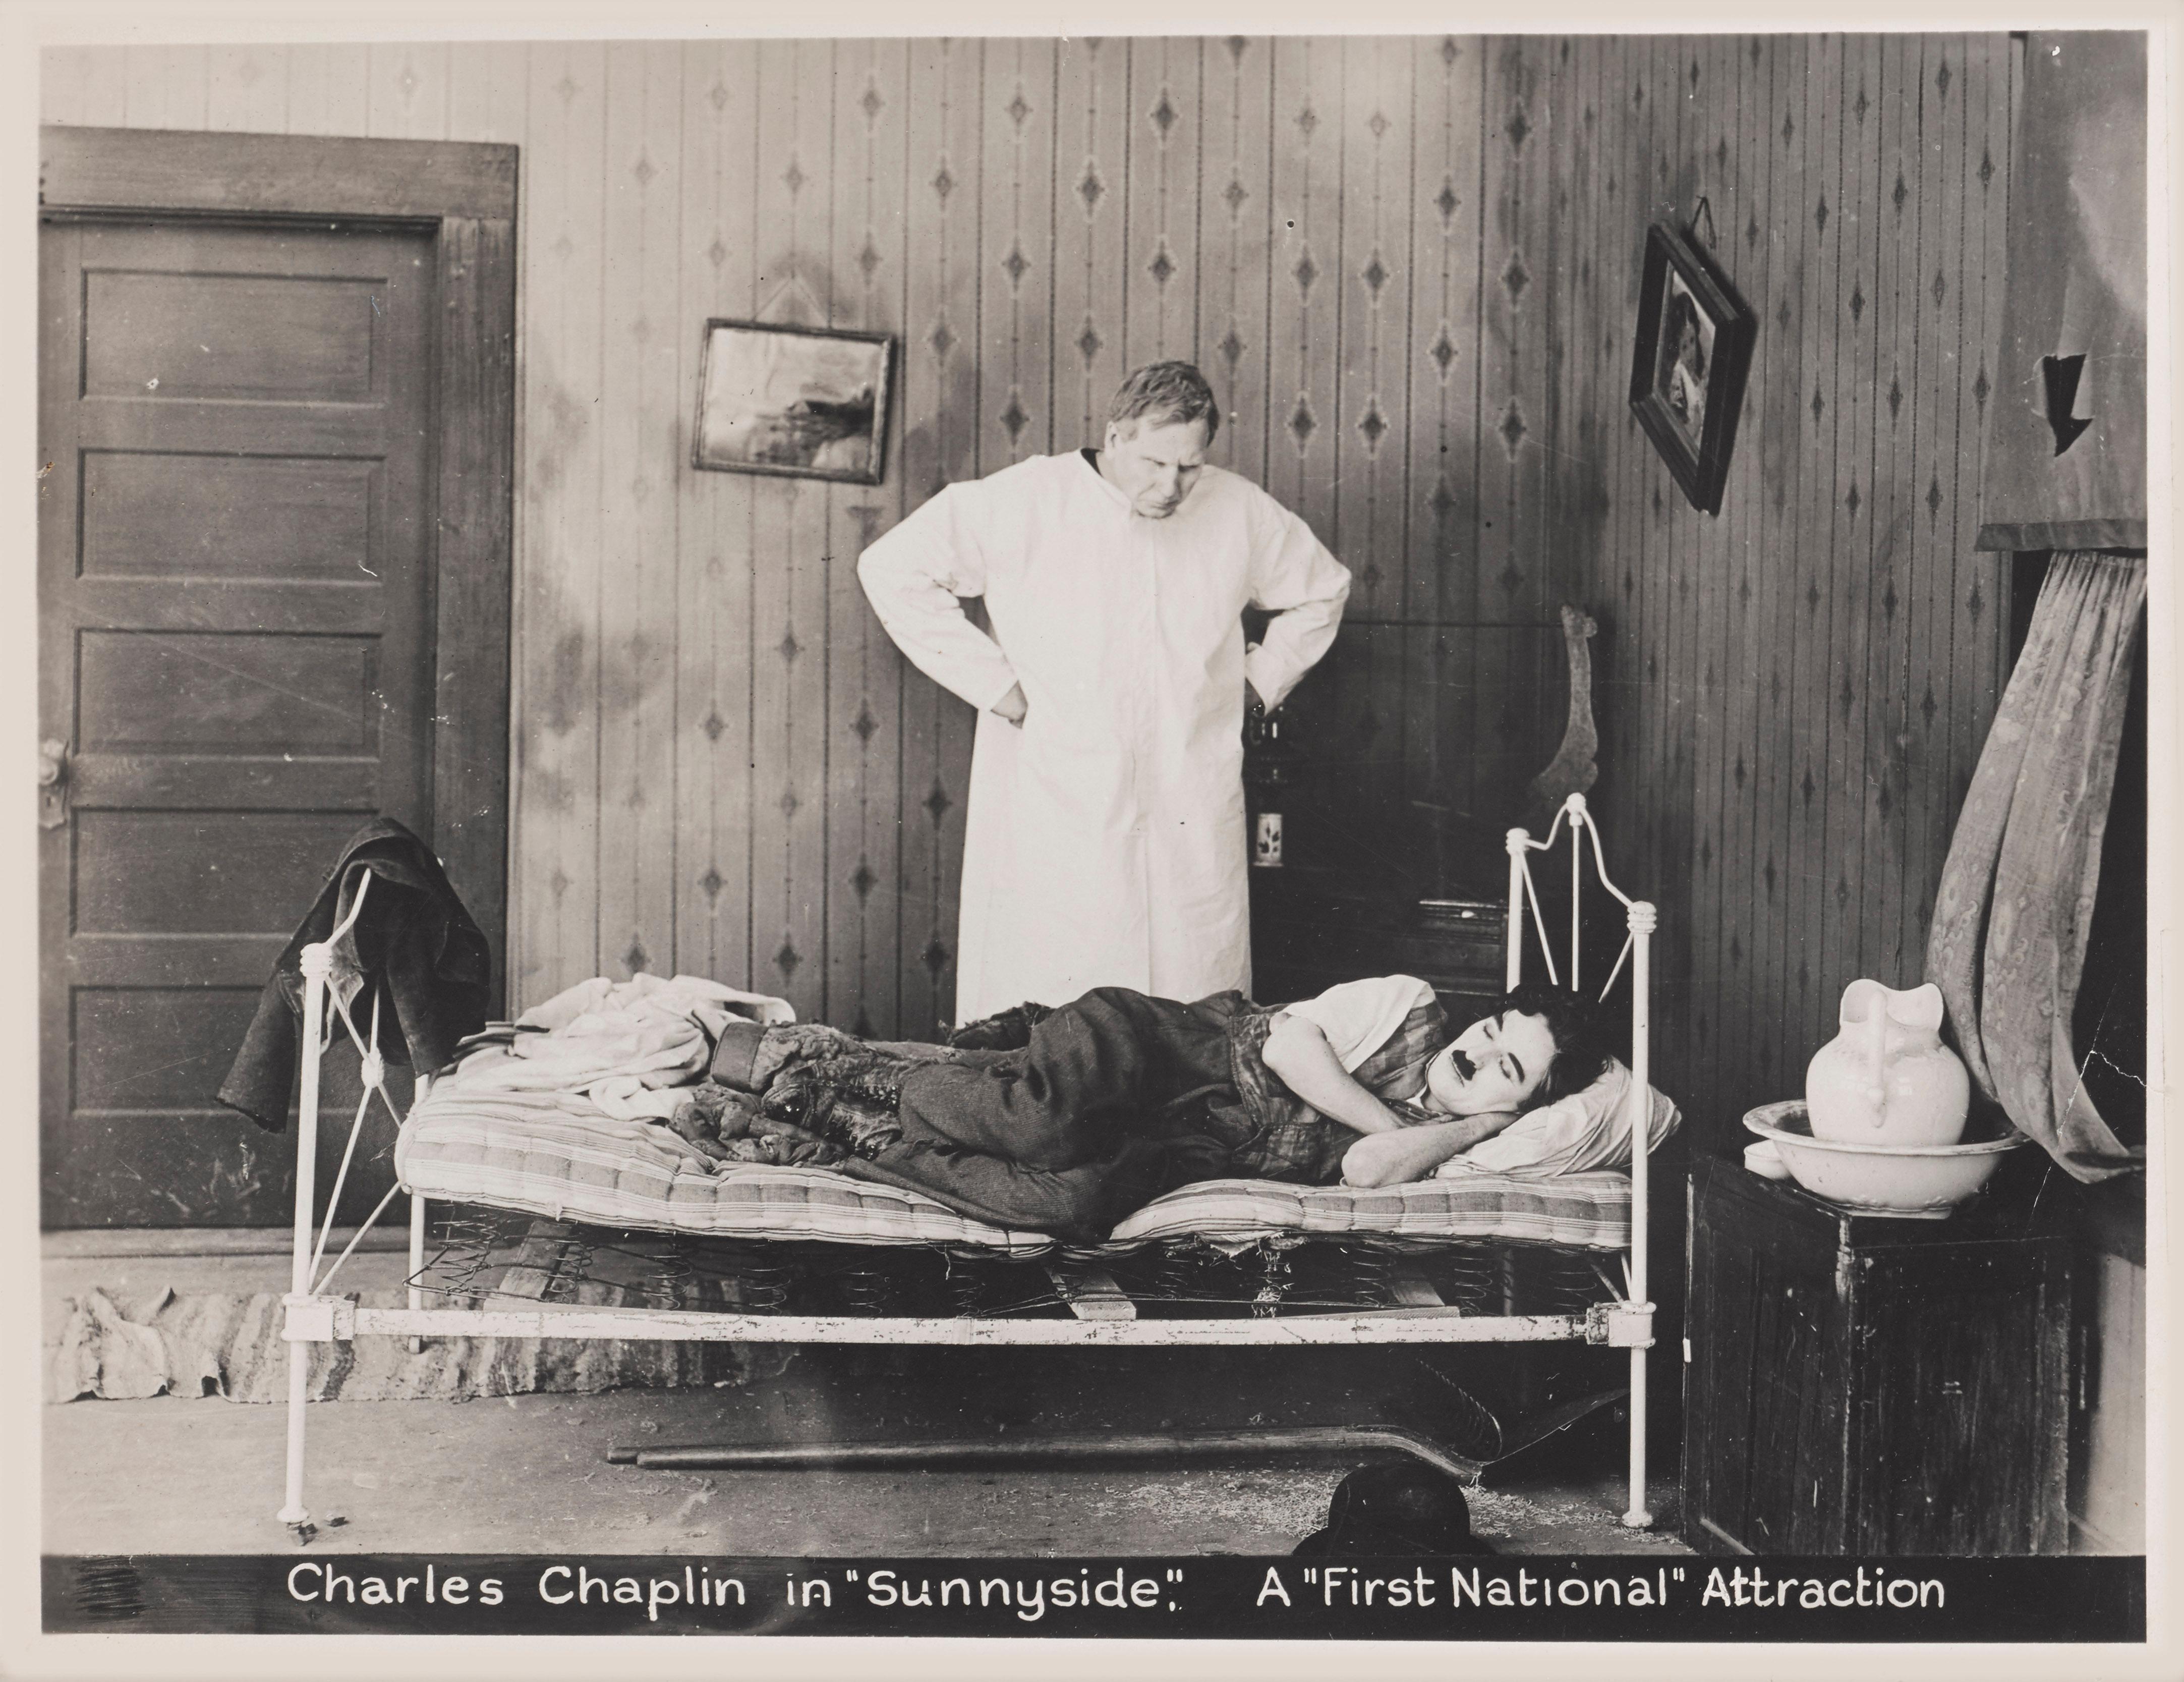 Original US production still for Charlie Chaplin and Edna Purviance 1919 silent comedy.
This early American short silent film was written by, directed by and stars Charlie Chaplin. In it Charlie works crazy hours at a hotel in rural Sunnyside, where